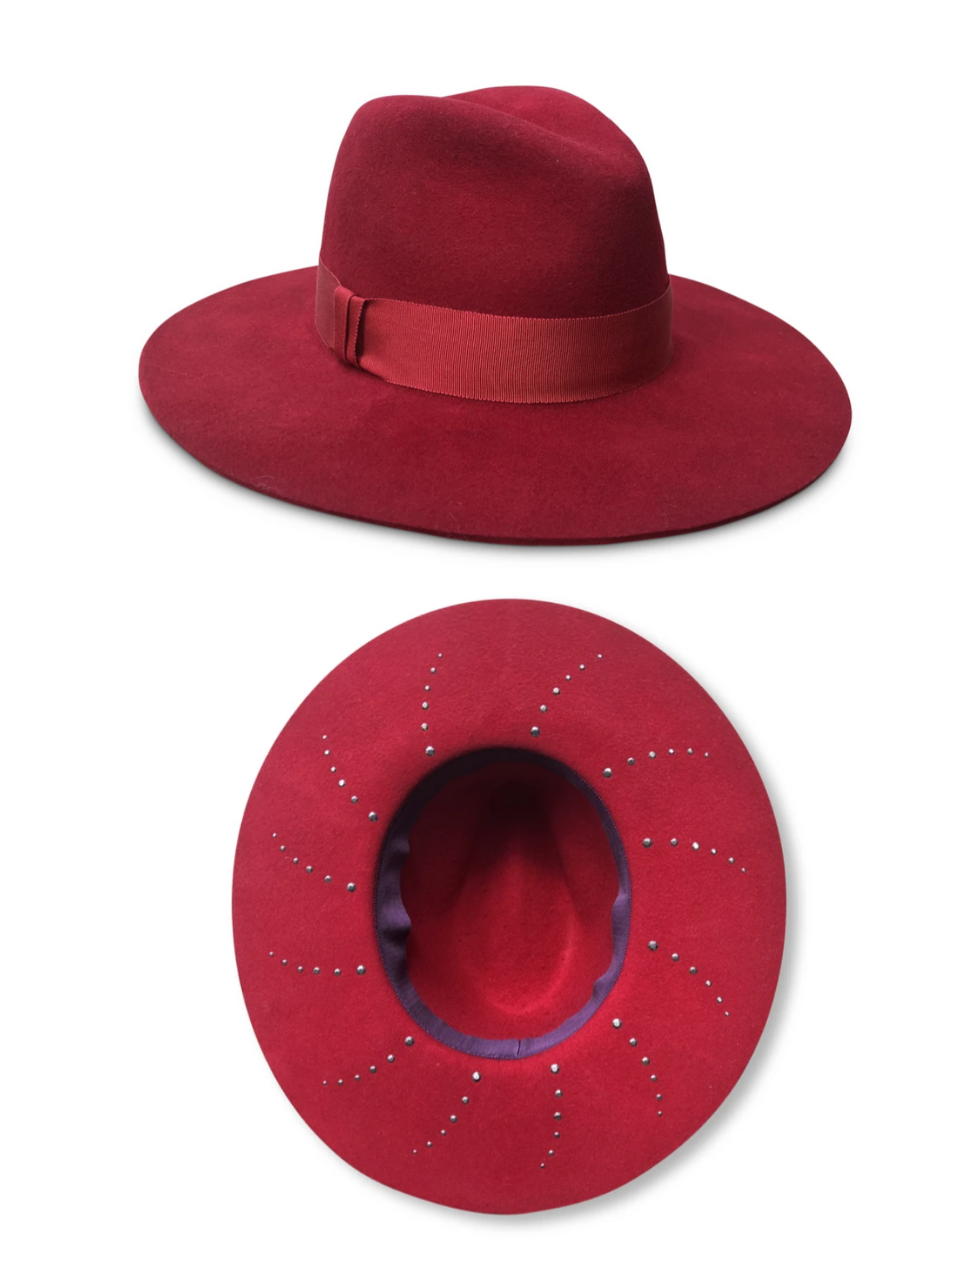 Classic center dent wool felt fedora with a 3.5 inch brim with crystal accent in red color created by cha chas house crystal visions